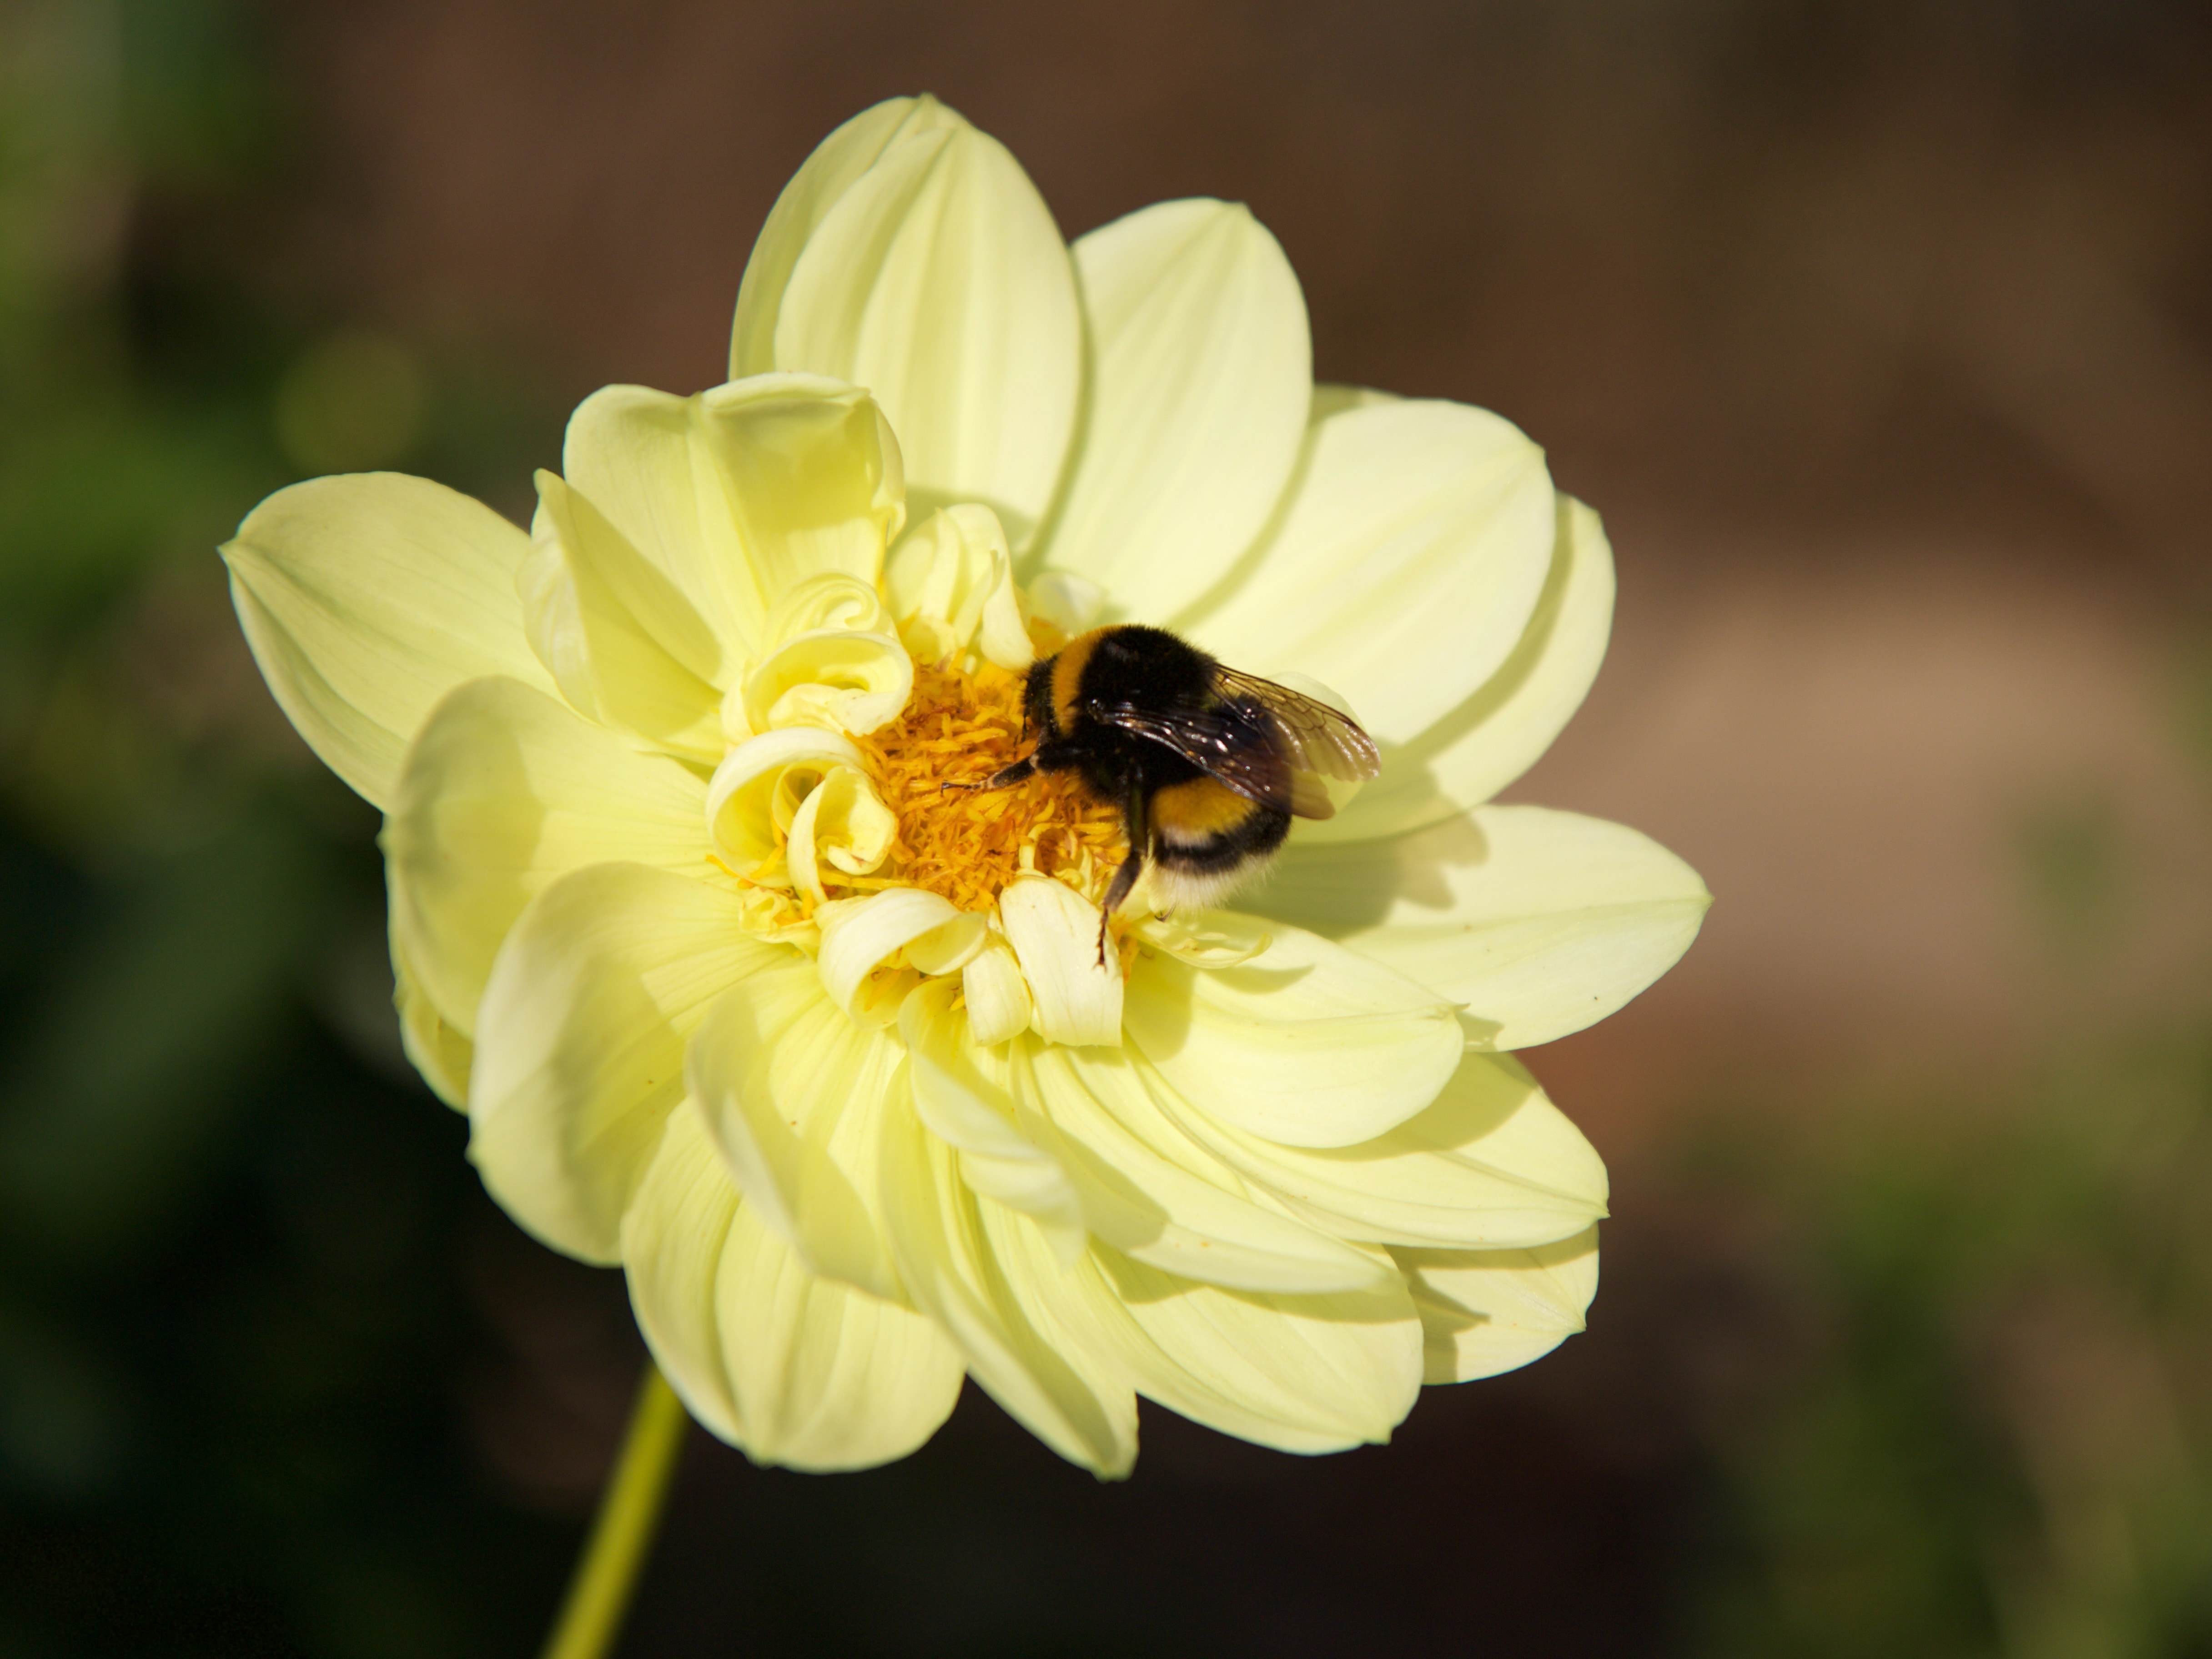 Flower, Nature, Insect, Hummel, Plant, insect, flower